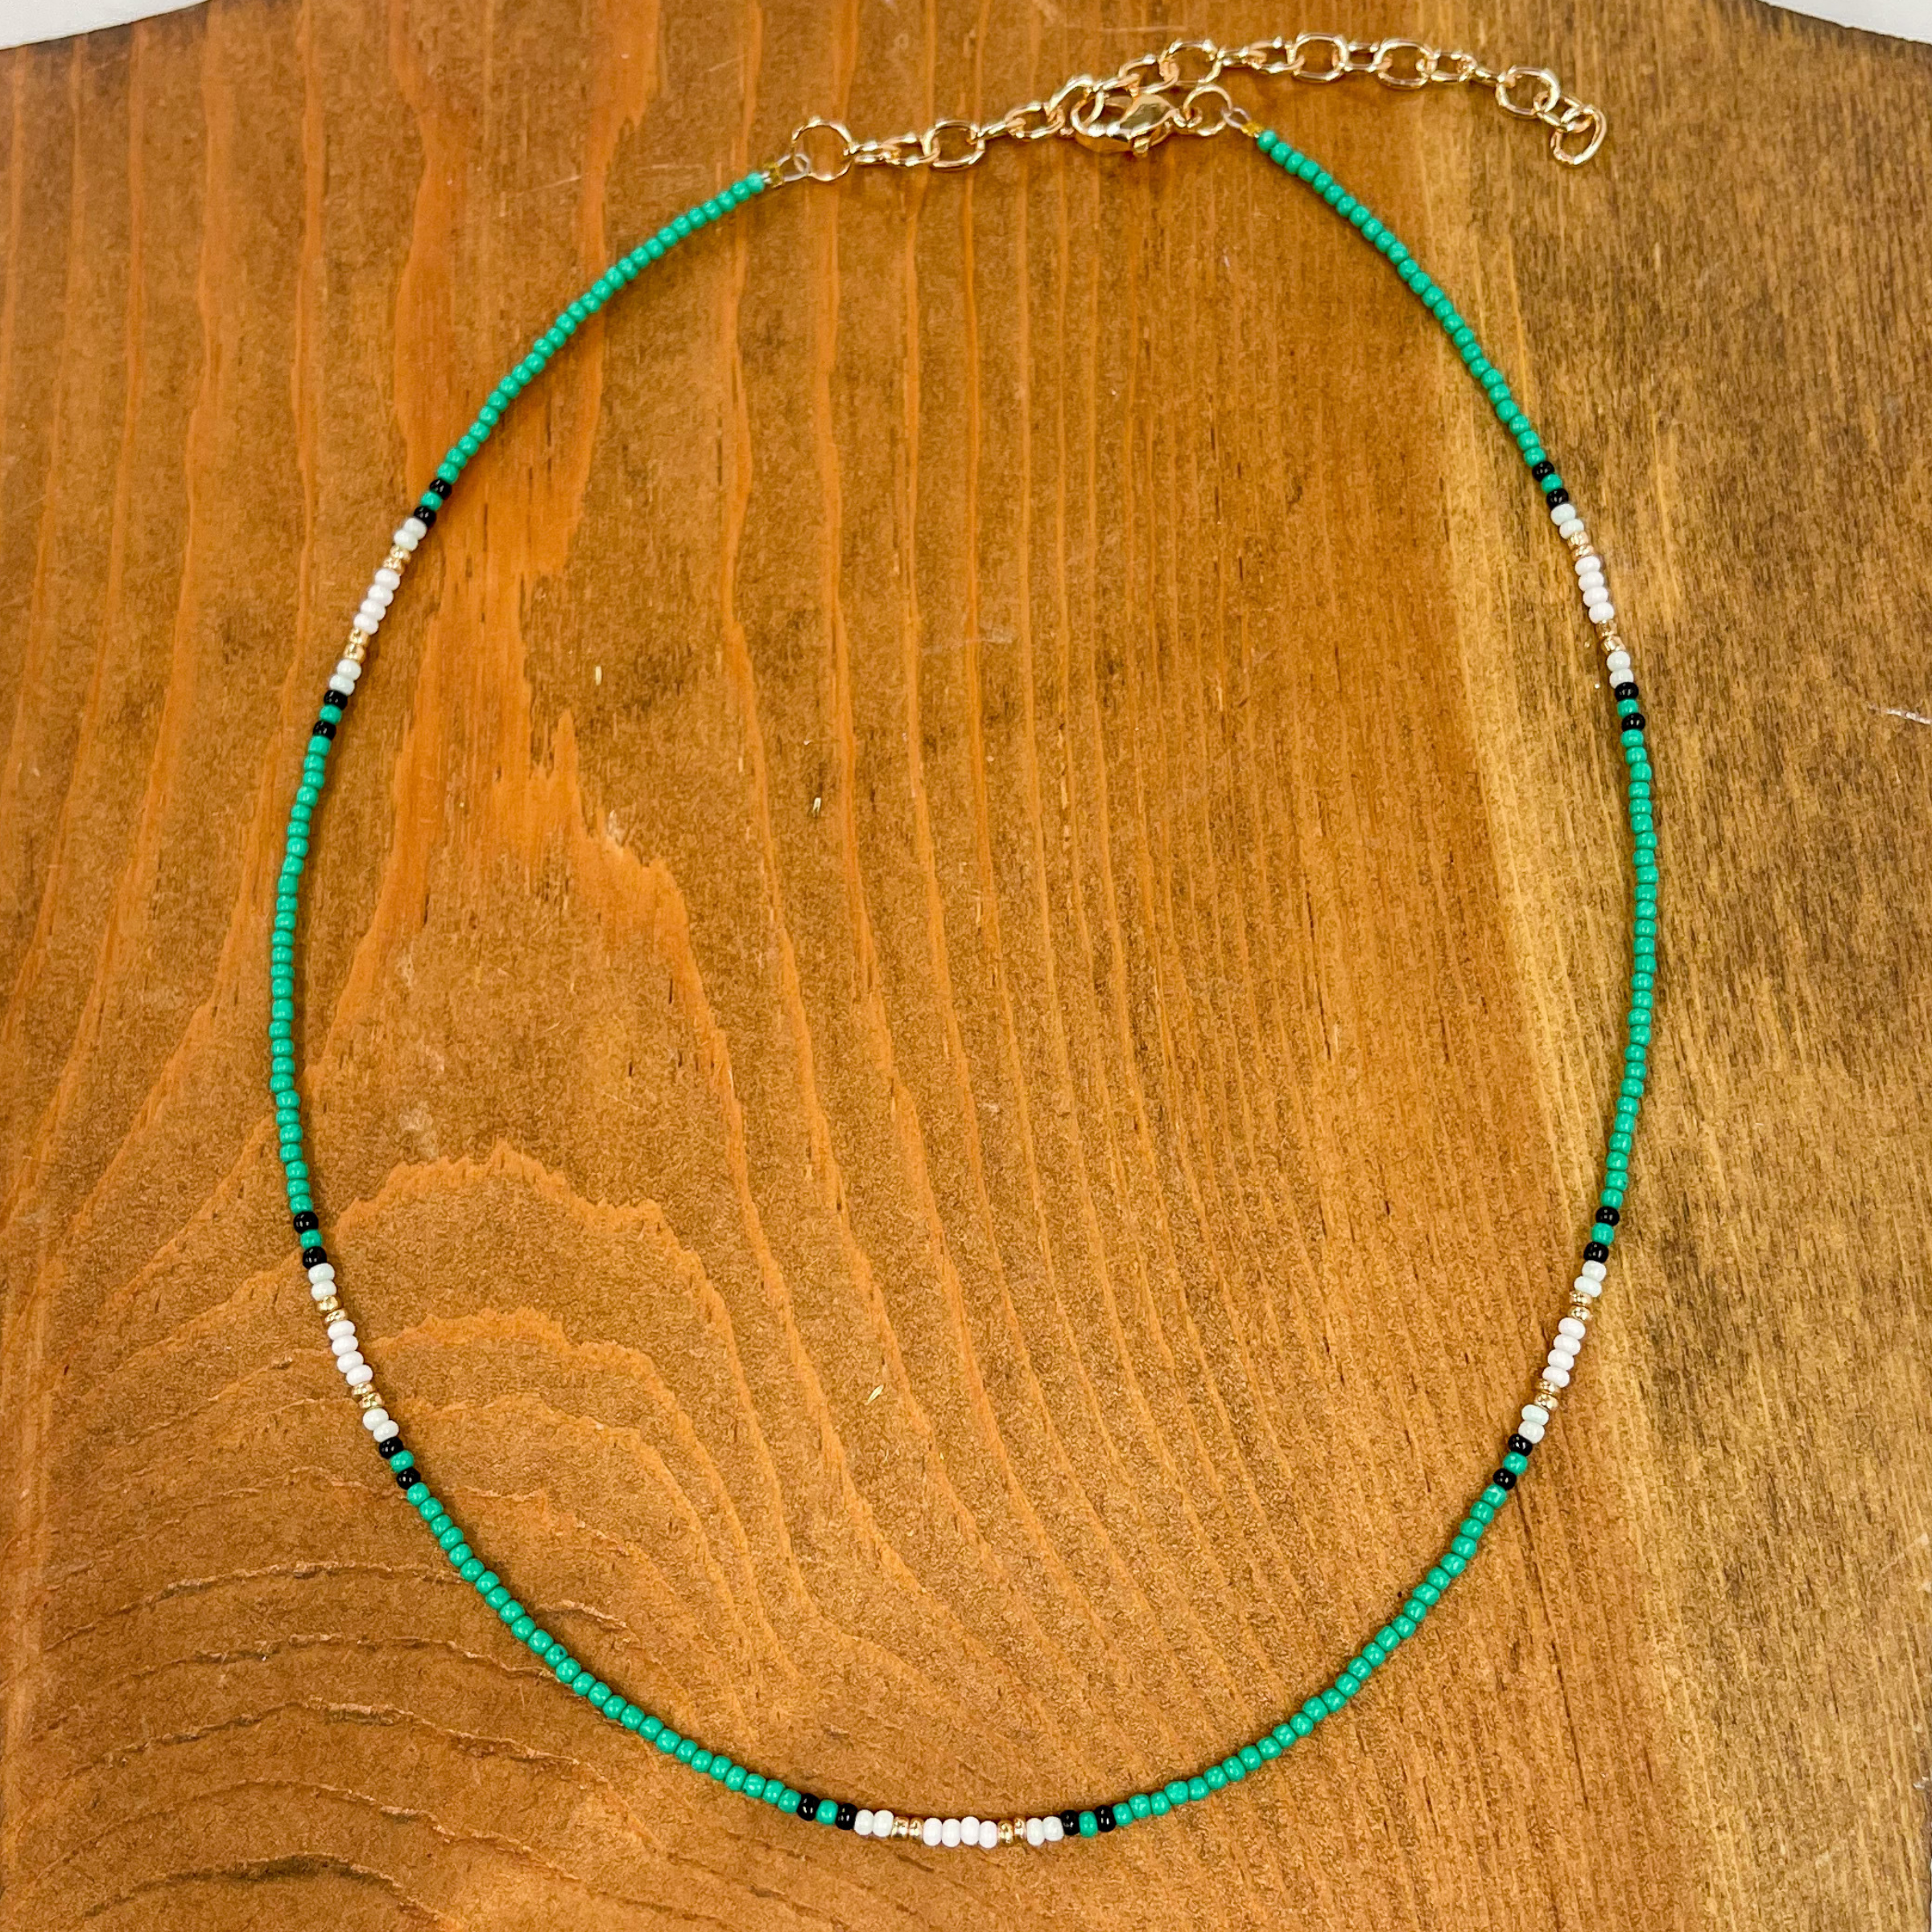 Seed beaded necklace with a gold adjustable. The  majority of the beads are teal with a few black, white,  and gold beads. This necklace is taken on a brown  block.